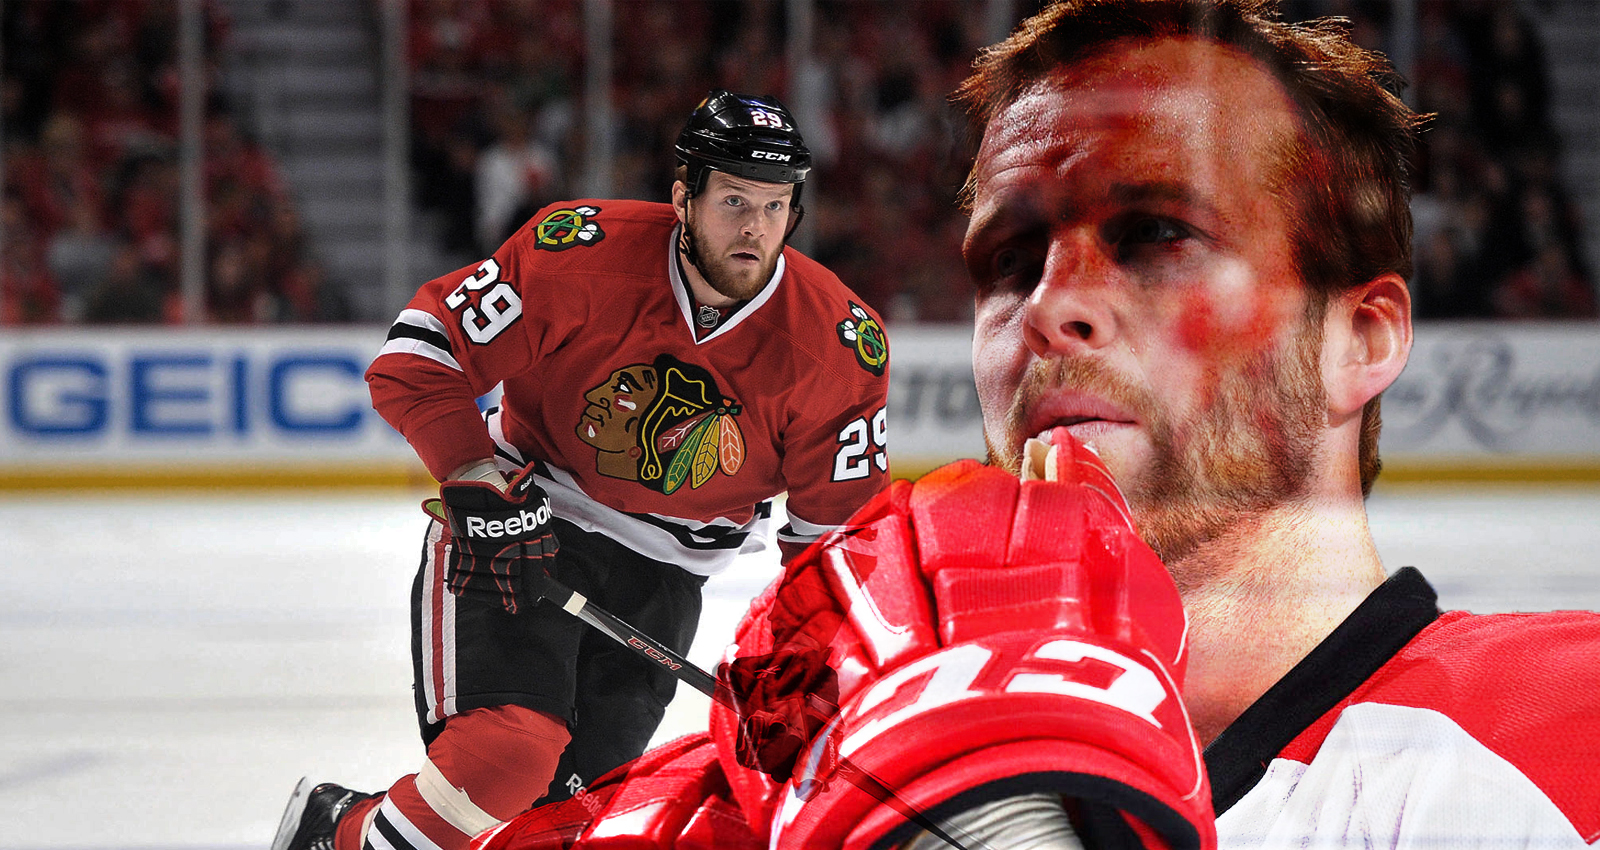 Bryan Bickell on His Battle with MS 